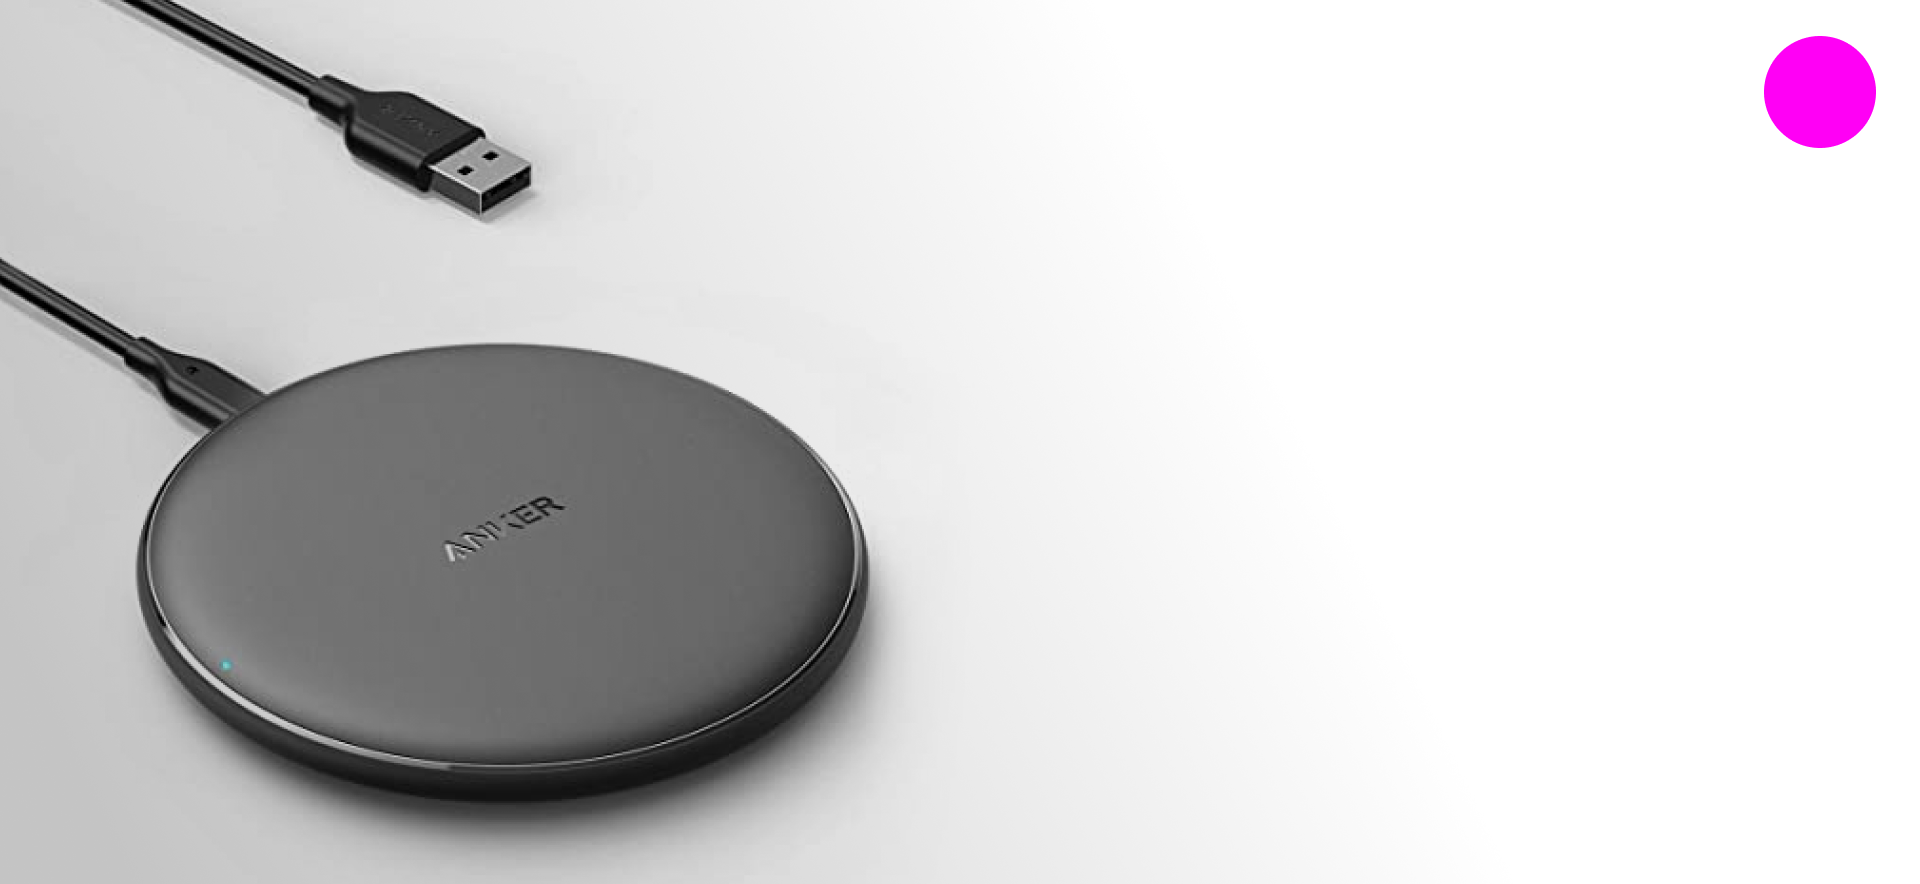 THE WIRELESS CHARGING PAD